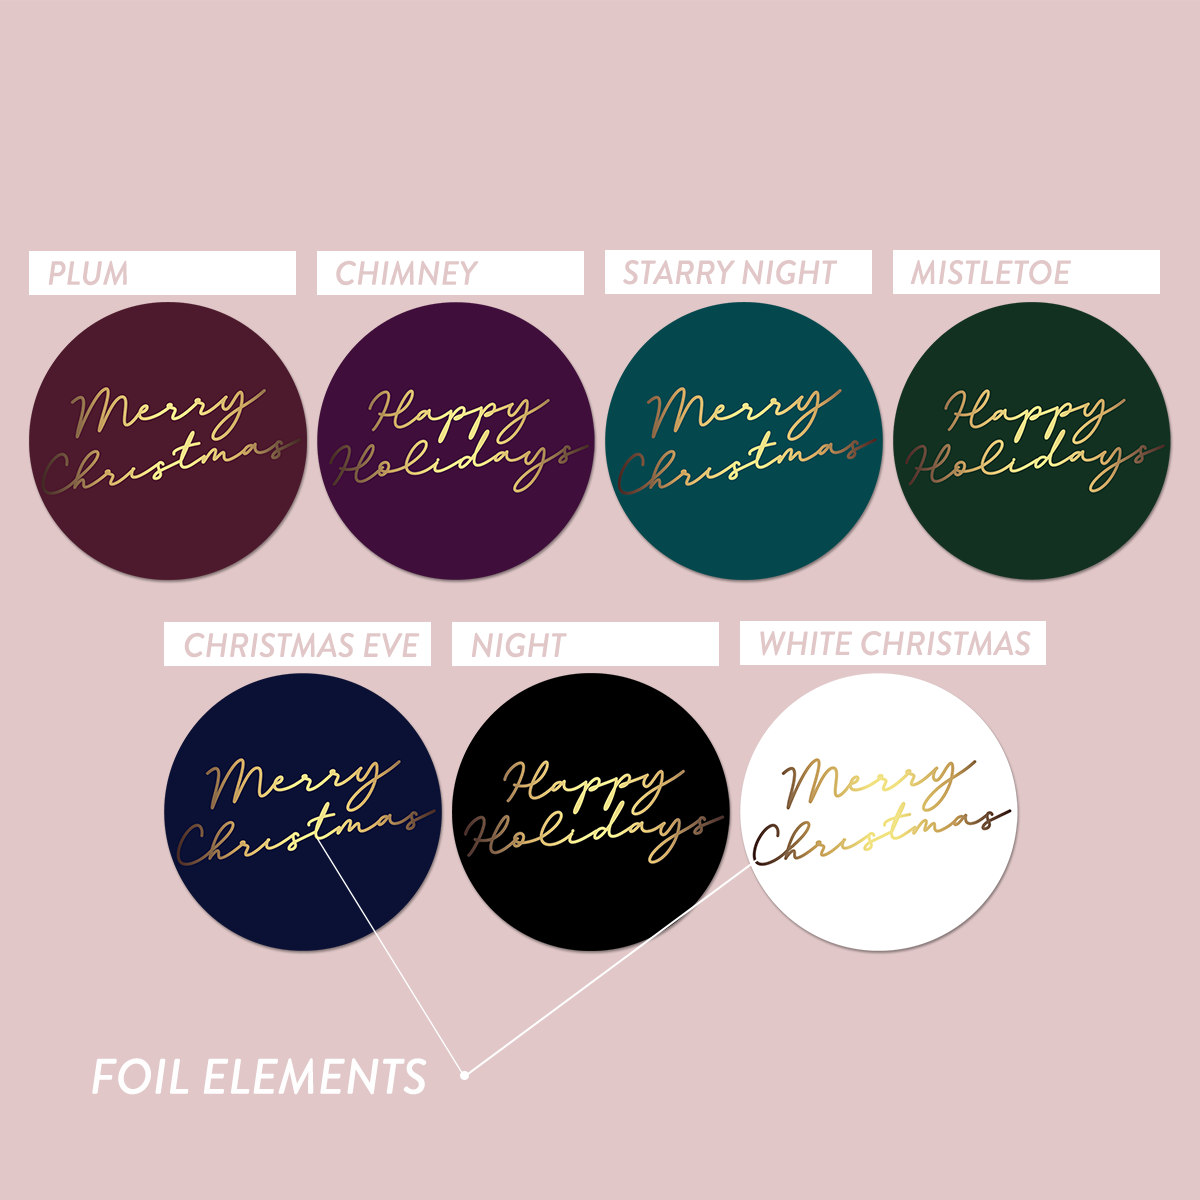 Foiled The Jewel Christmas Collection Round Labels - Plain - Mystic